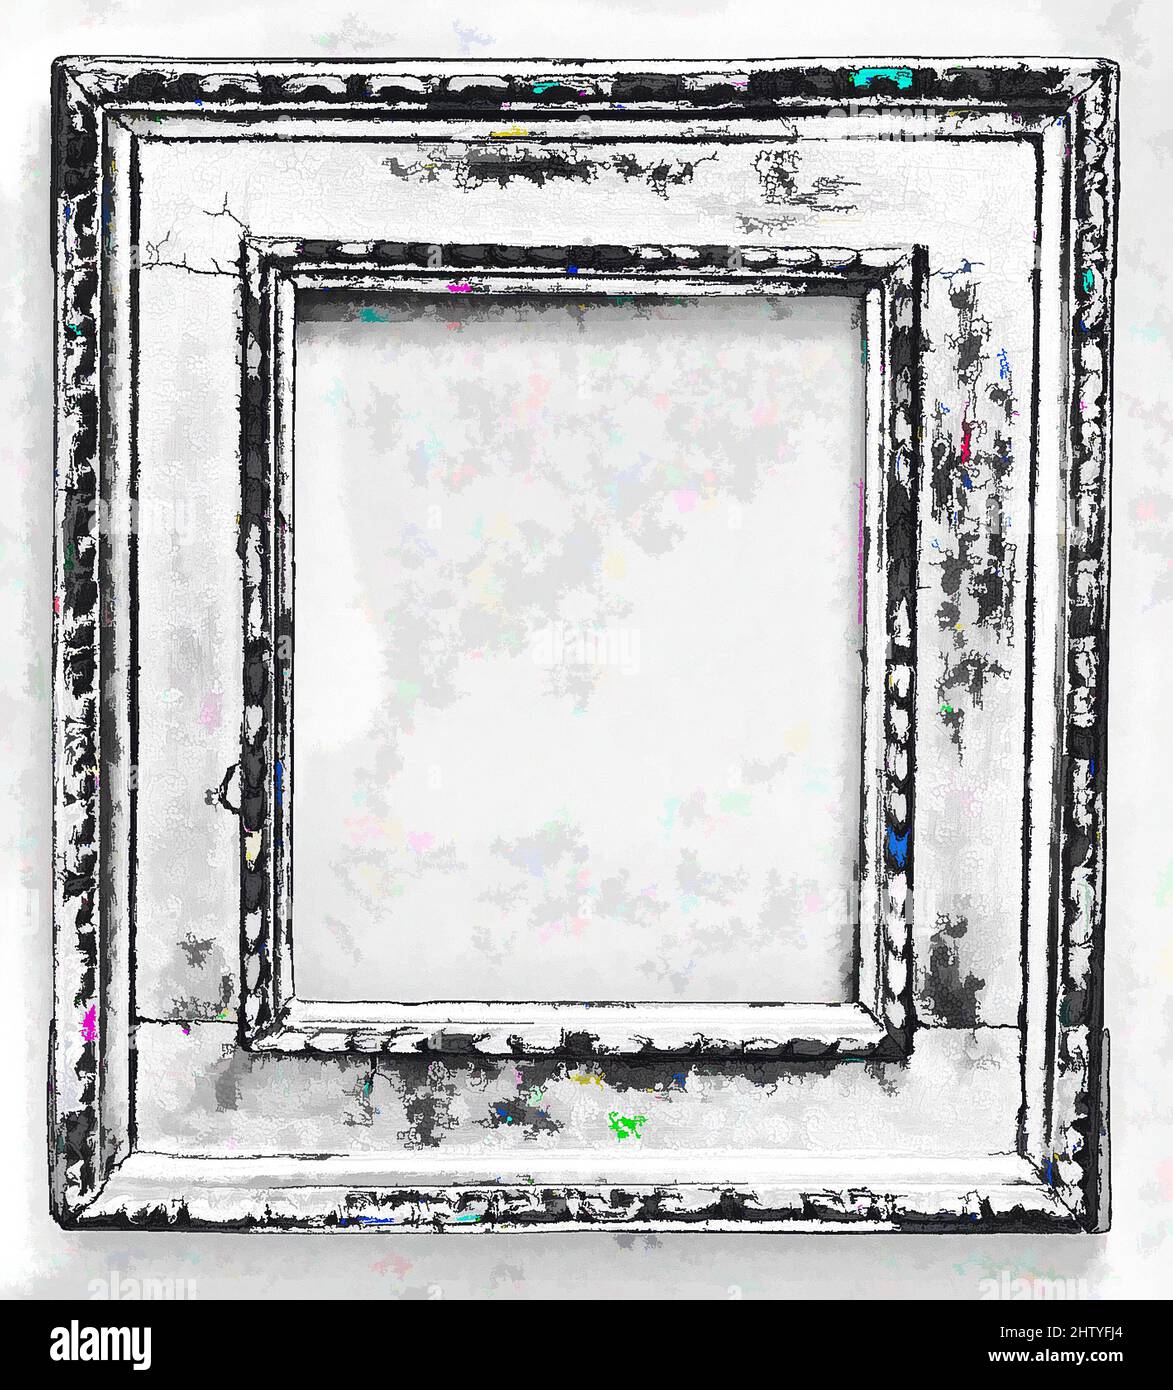 Art inspired by Cassetta frame, late 16th century, Italian, Bologna, Poplar, 32.2 x 28.6, 19 x 15.3, 20.7 x 17.3 cm., Frames, Classic works modernized by Artotop with a splash of modernity. Shapes, color and value, eye-catching visual impact on art. Emotions through freedom of artworks in a contemporary way. A timeless message pursuing a wildly creative new direction. Artists turning to the digital medium and creating the Artotop NFT Stock Photo